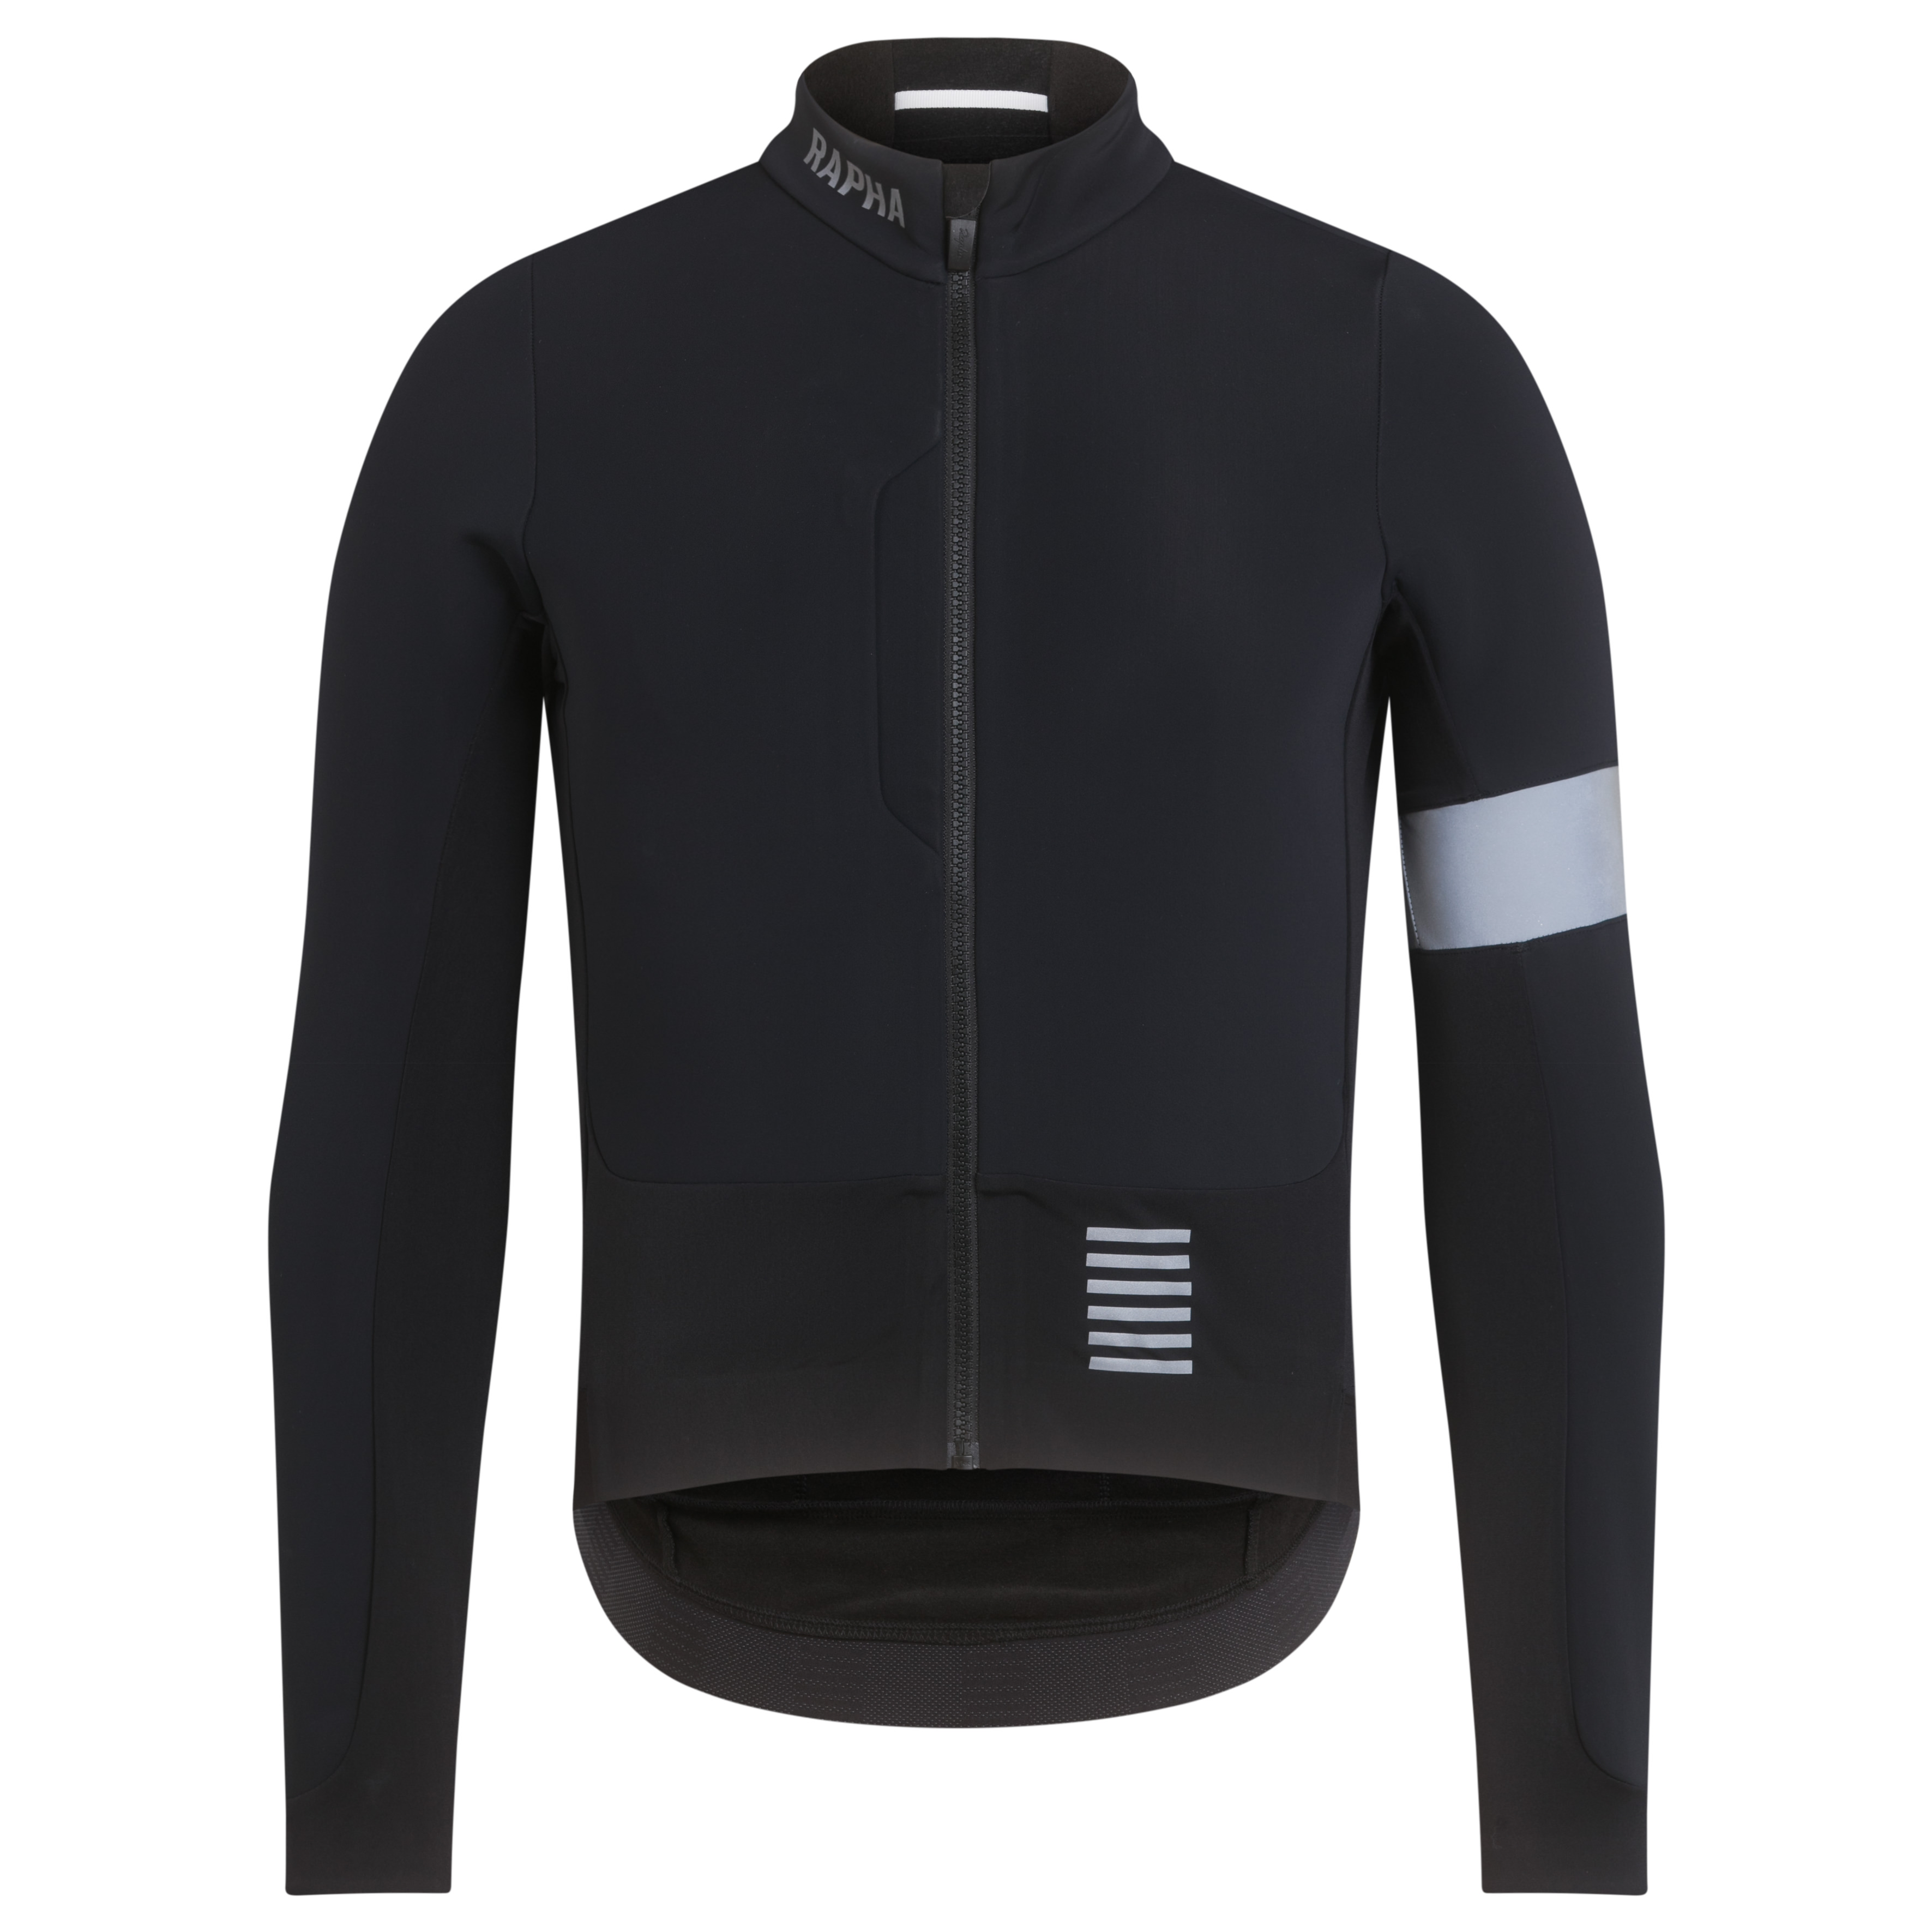 Men's Pro Team Winter Cycling Jacket for Cold Rides | Rapha